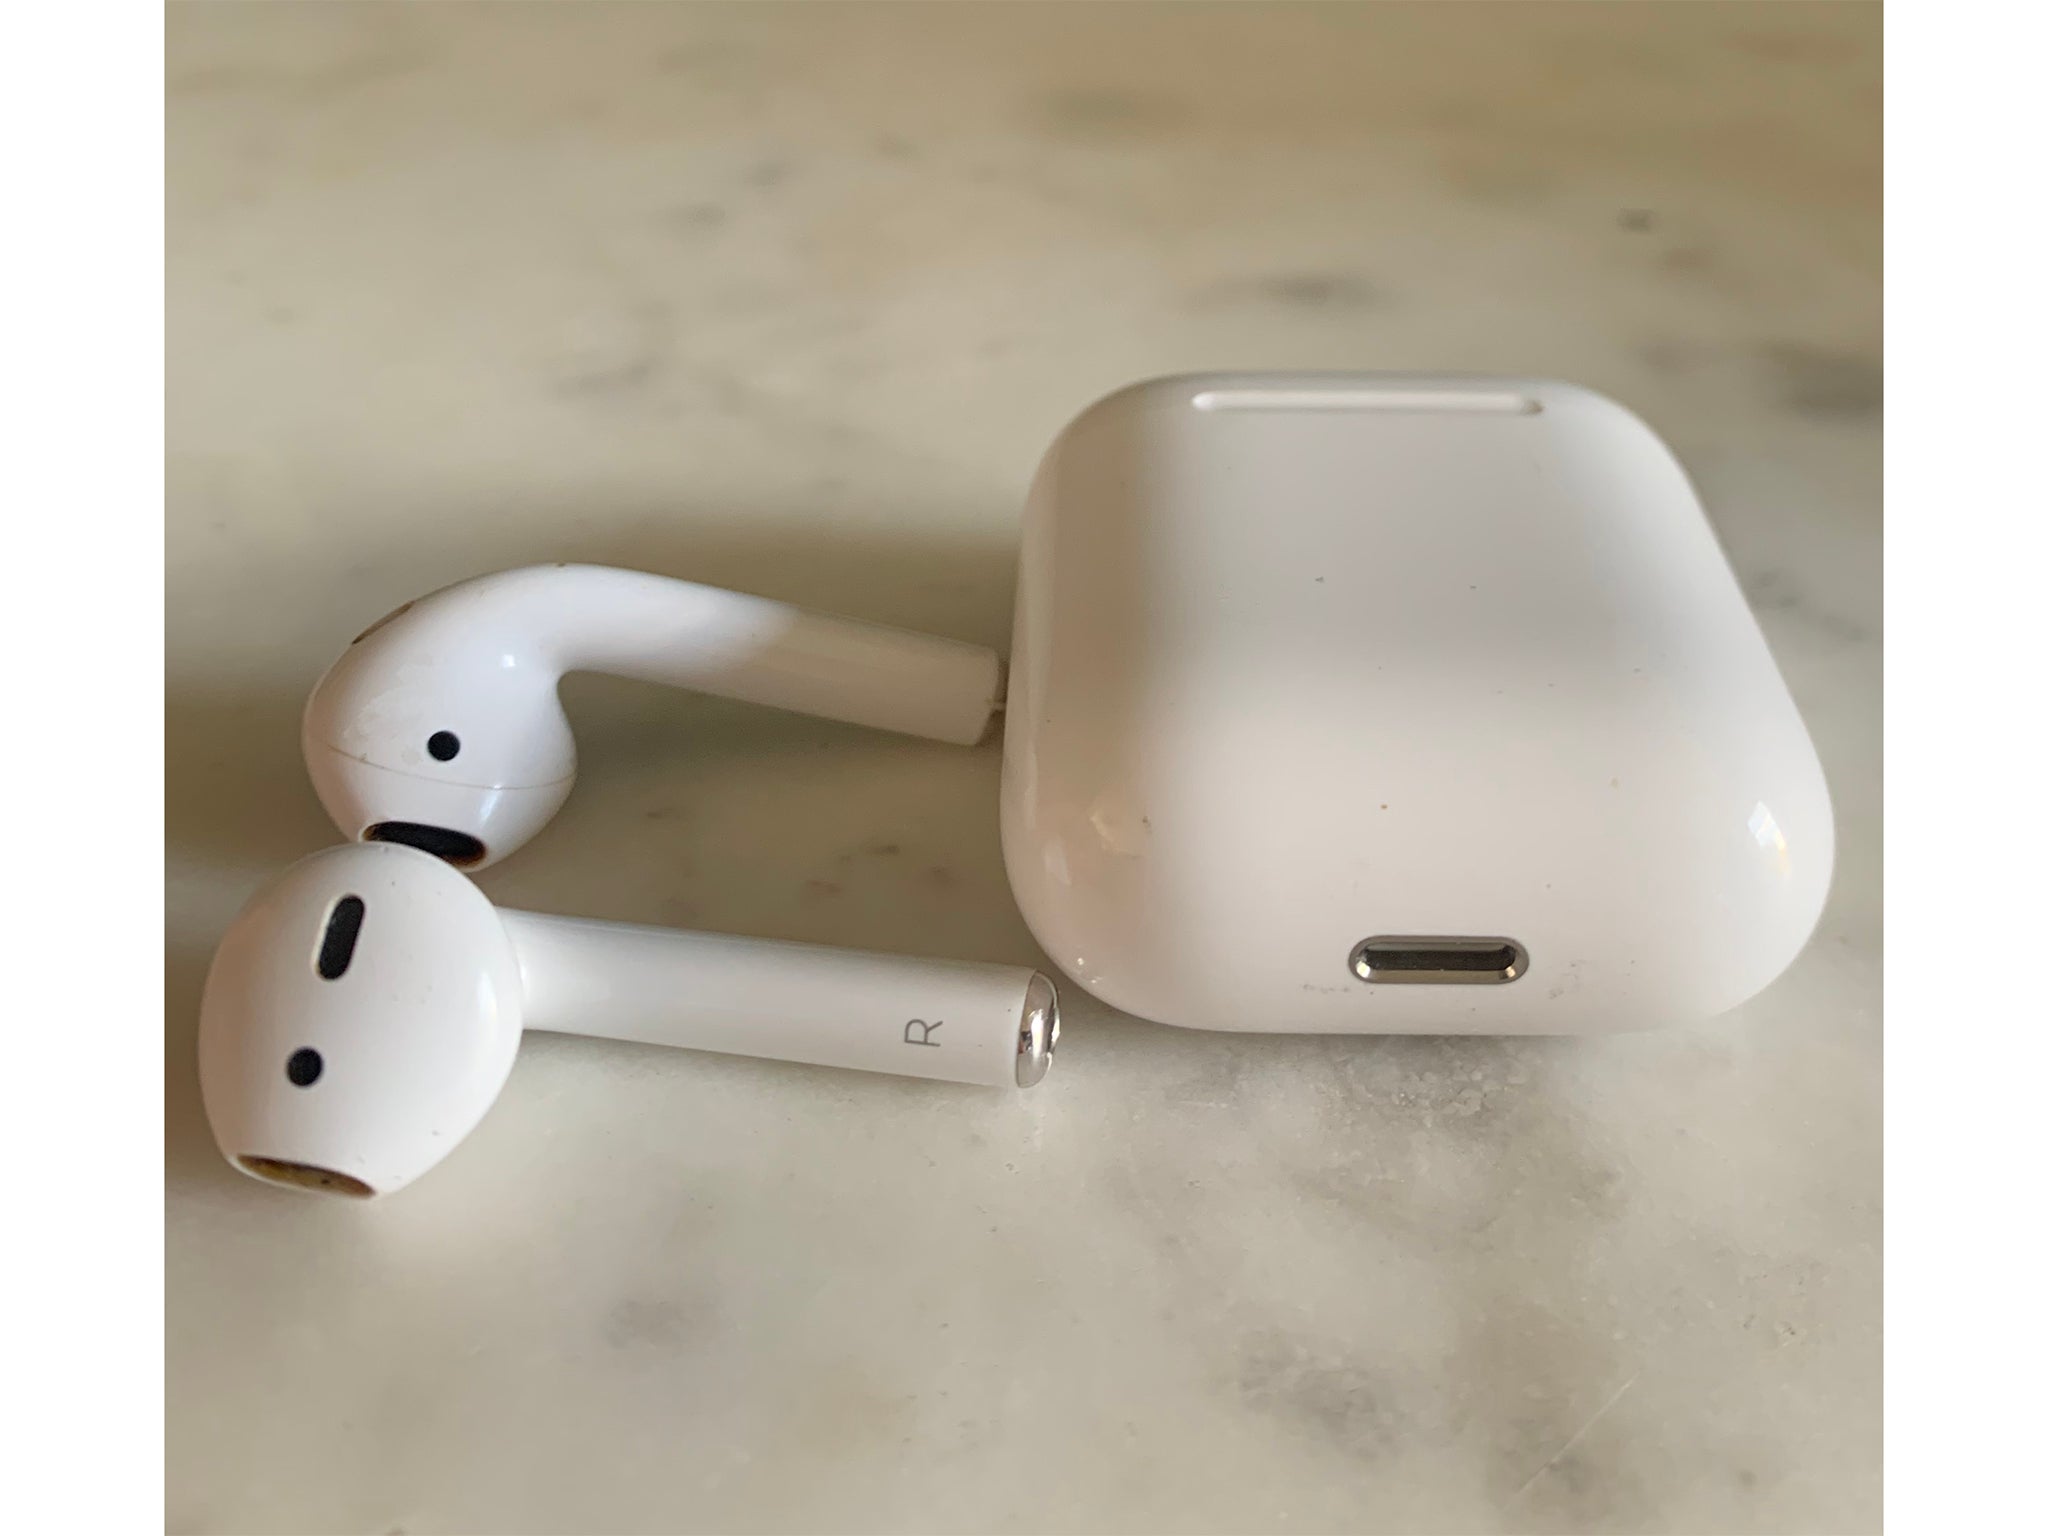 Apple AirPods Pro (2019) review